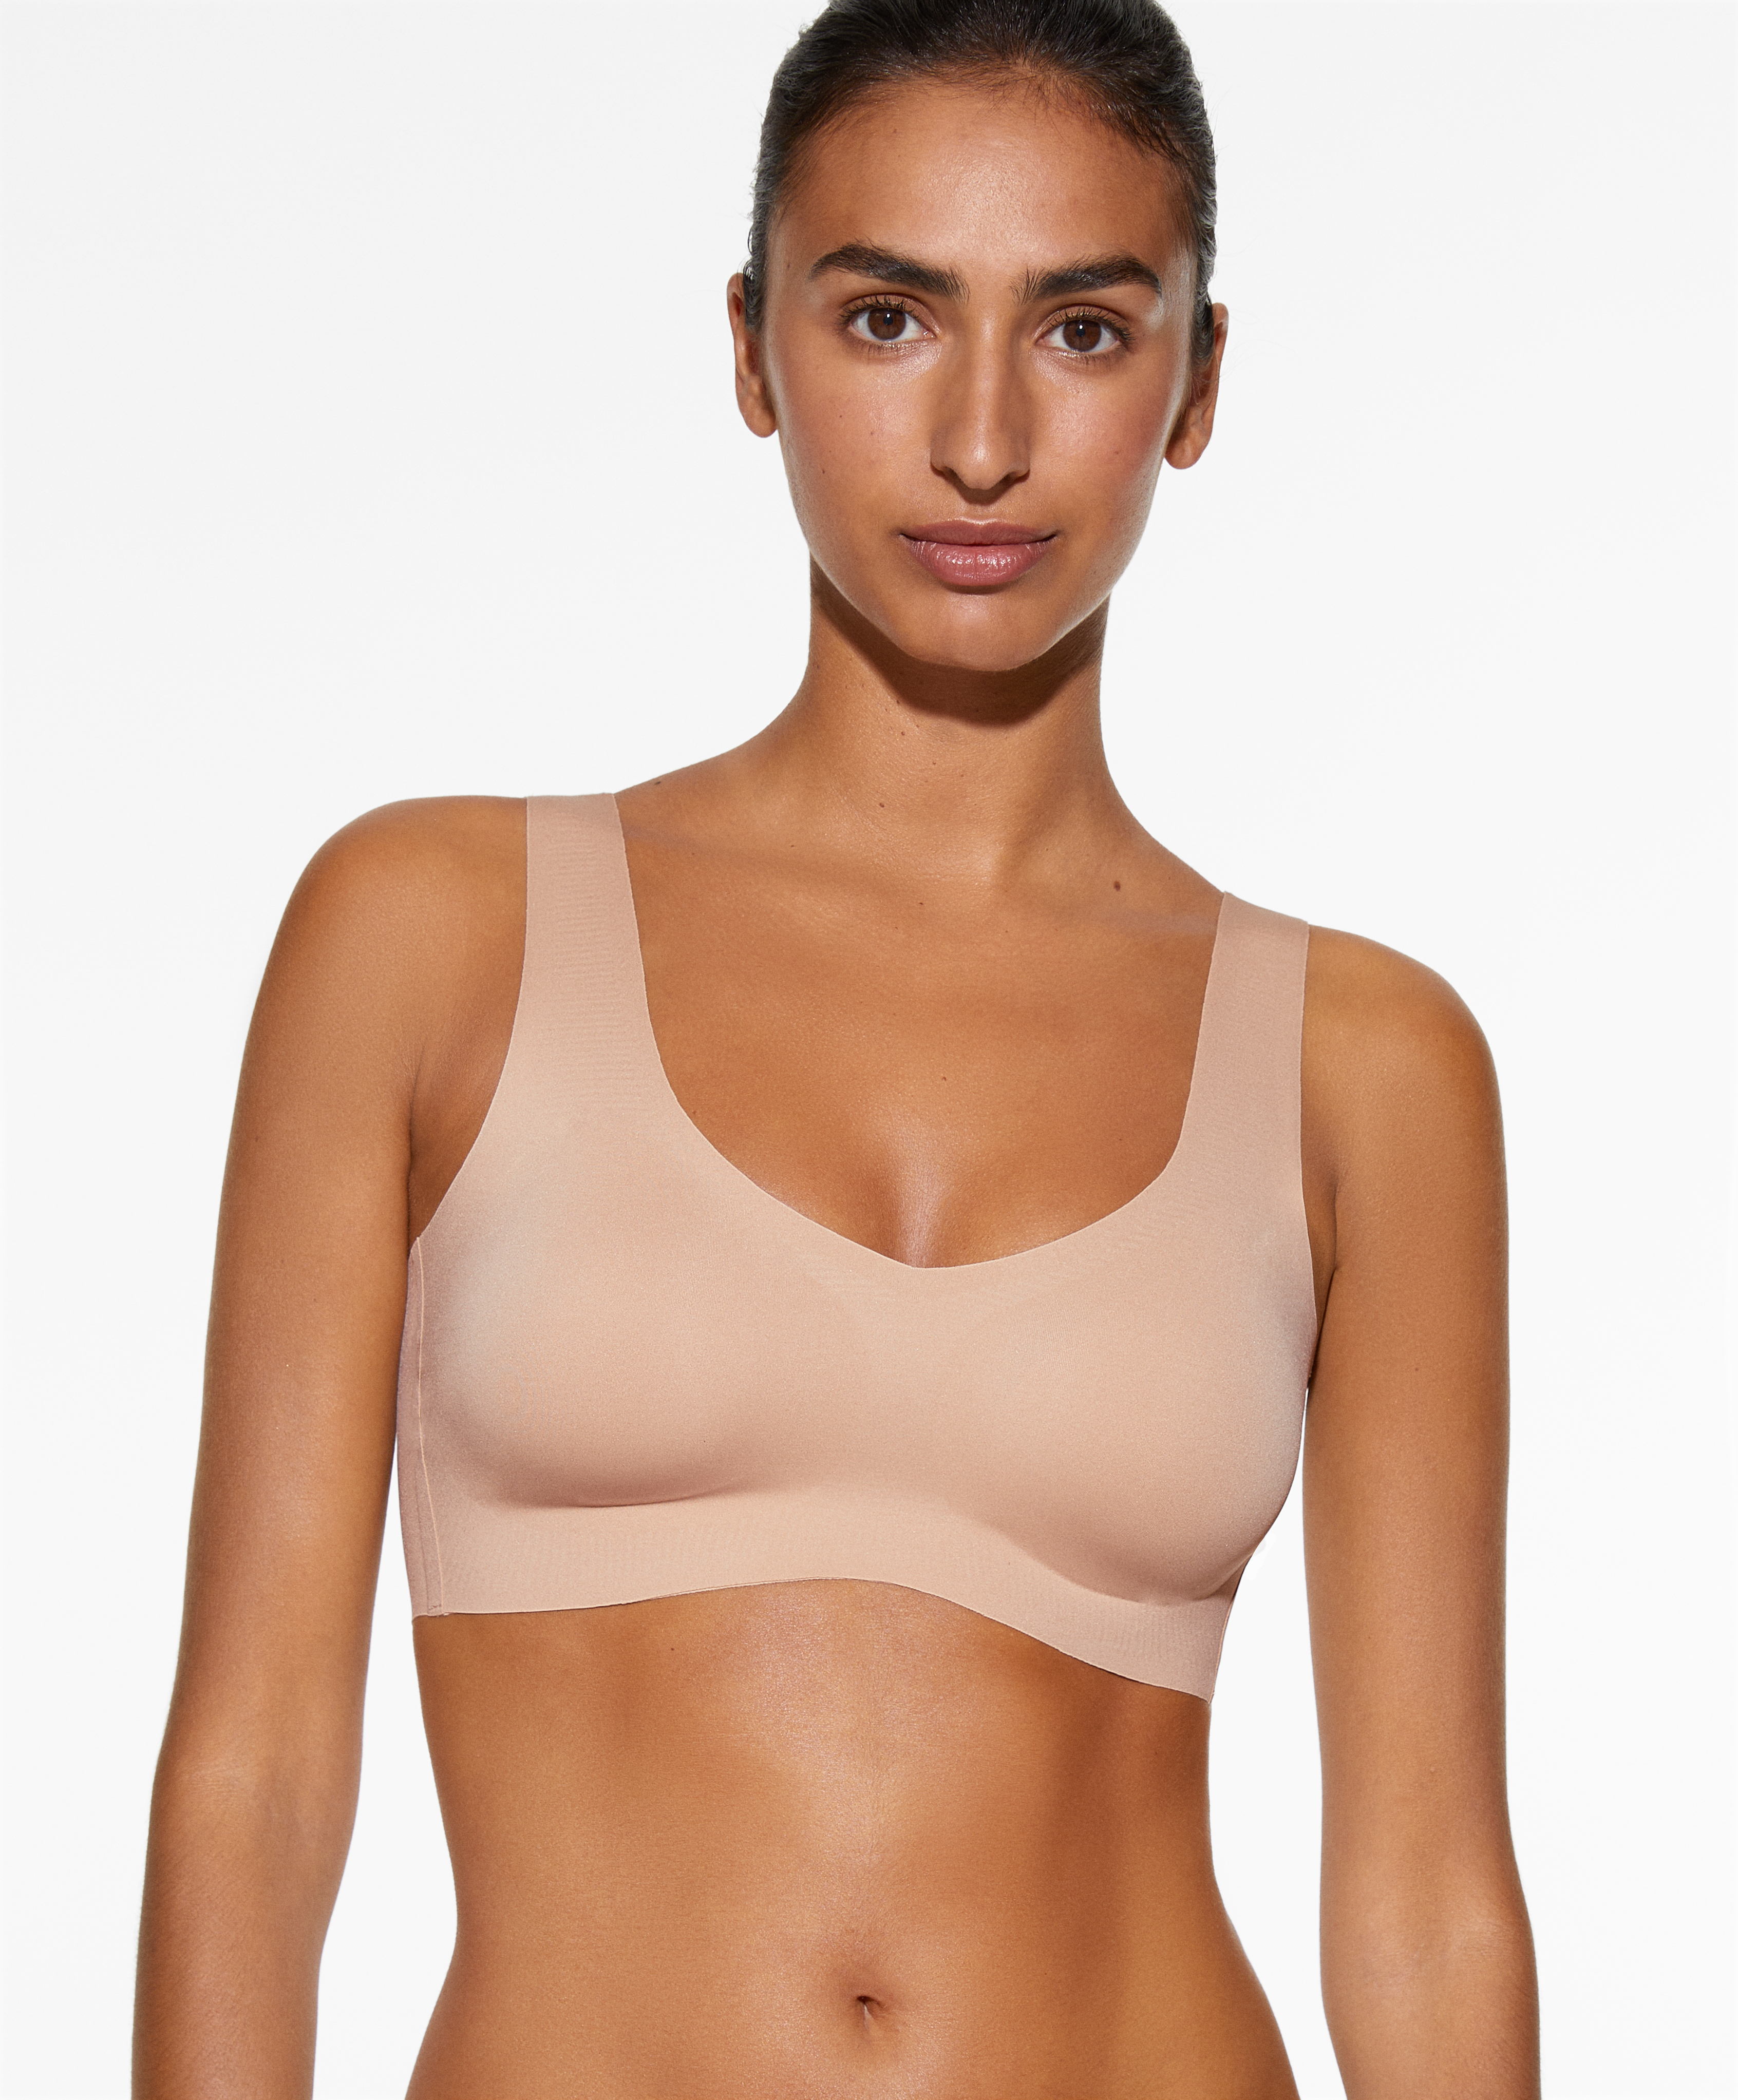 Oysho Women's Comfort Bra Non-Wired Supersoft Lace Trim 34B (Shop Soiled)